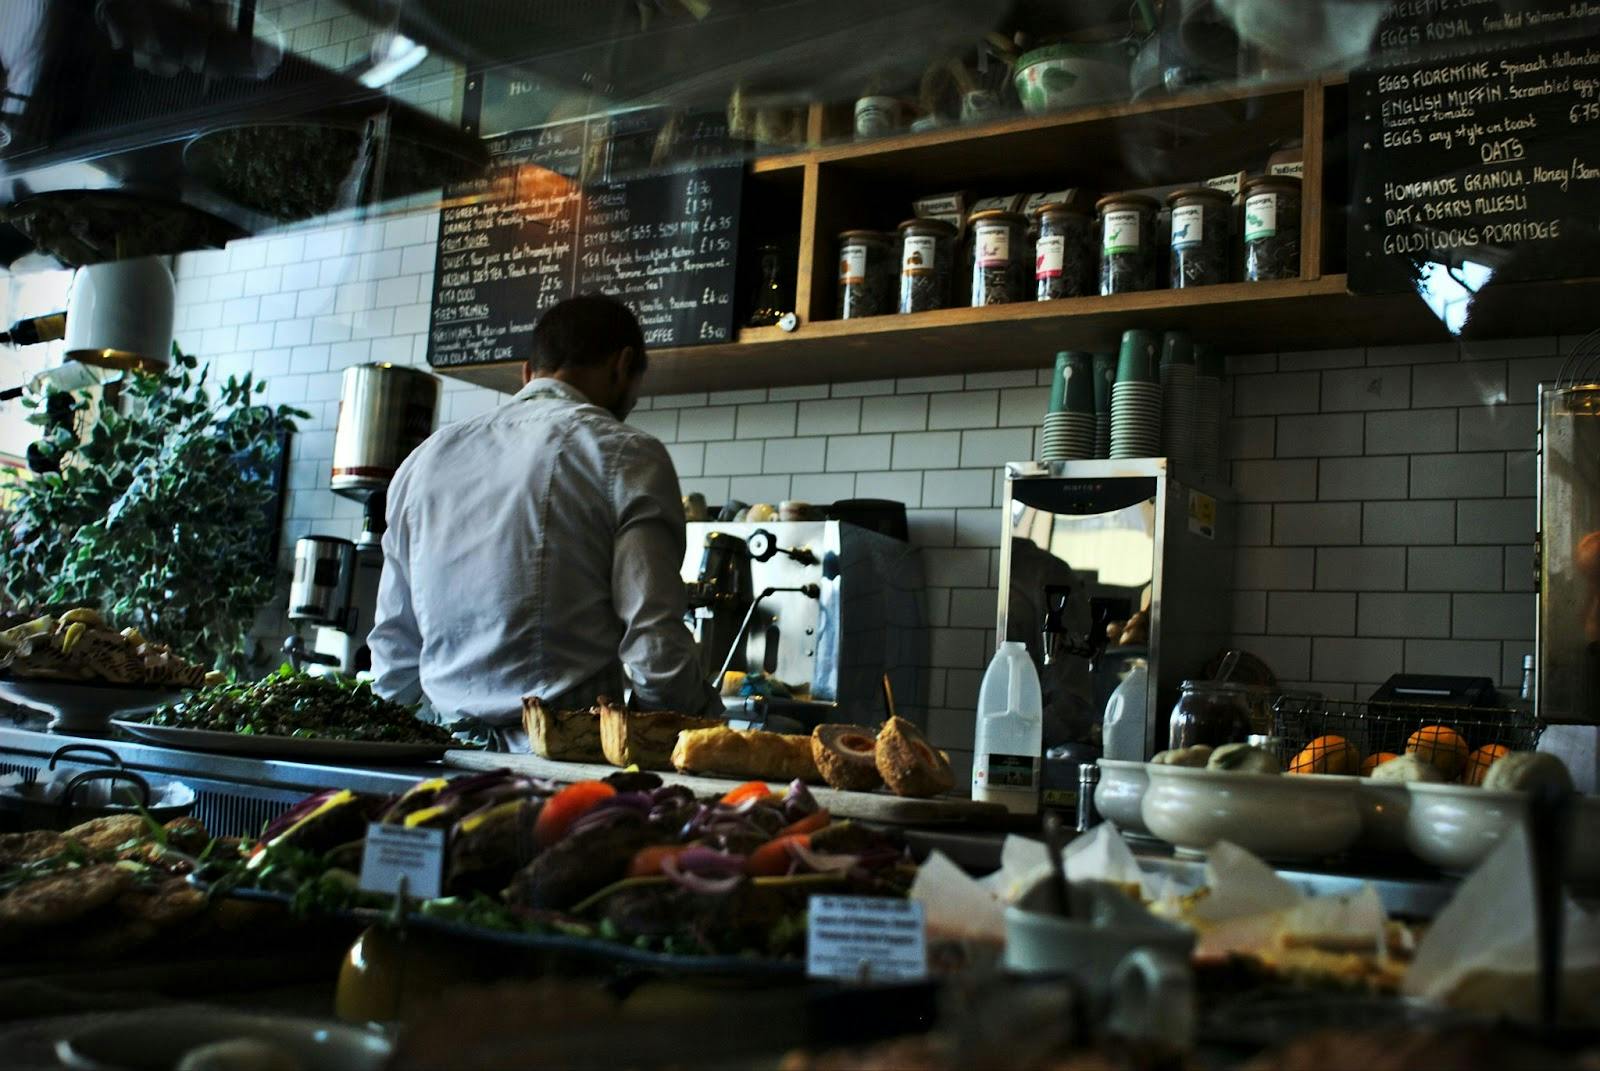 Image of a restaurant staff making coffee in an open kitchen